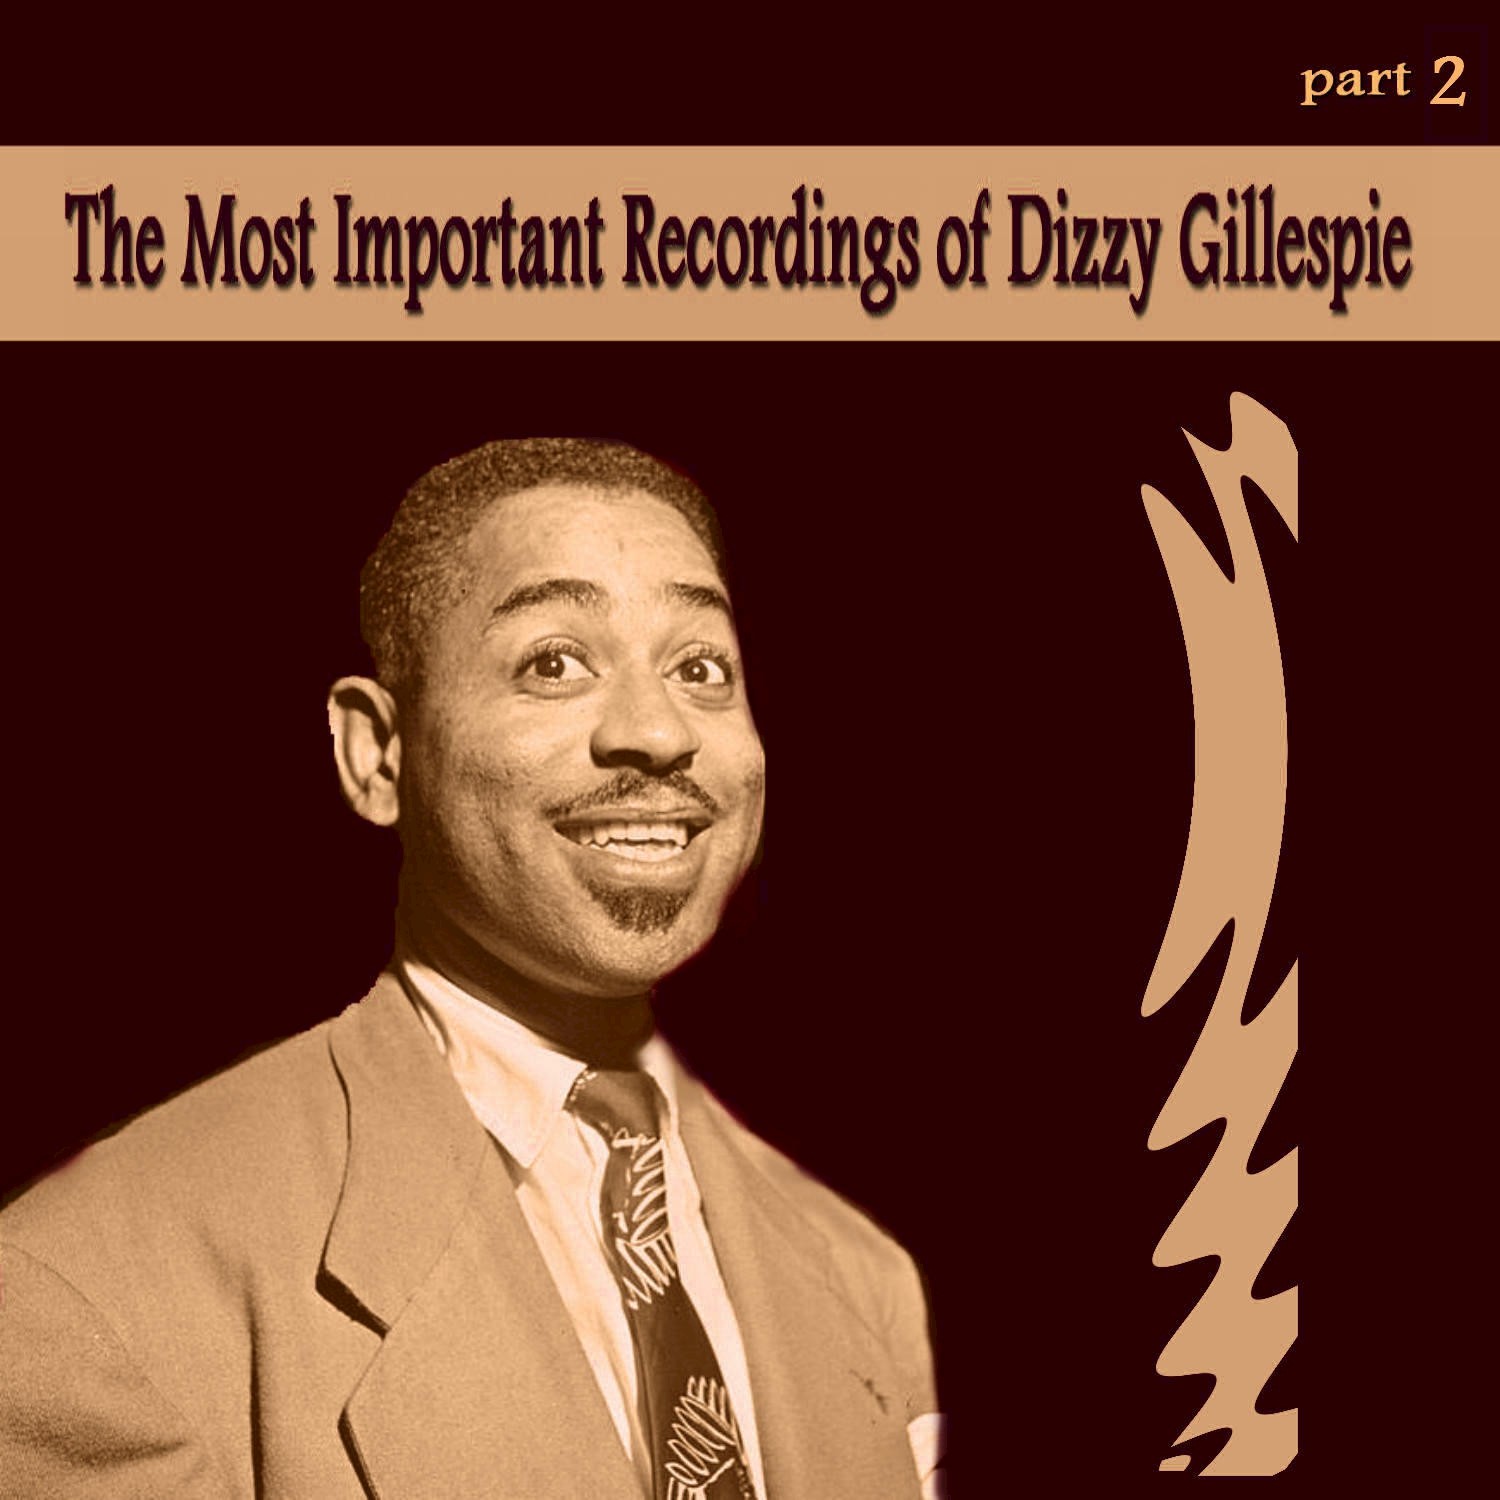 The Most Important Recordings of Dizzy Gillespie, Pt. 2